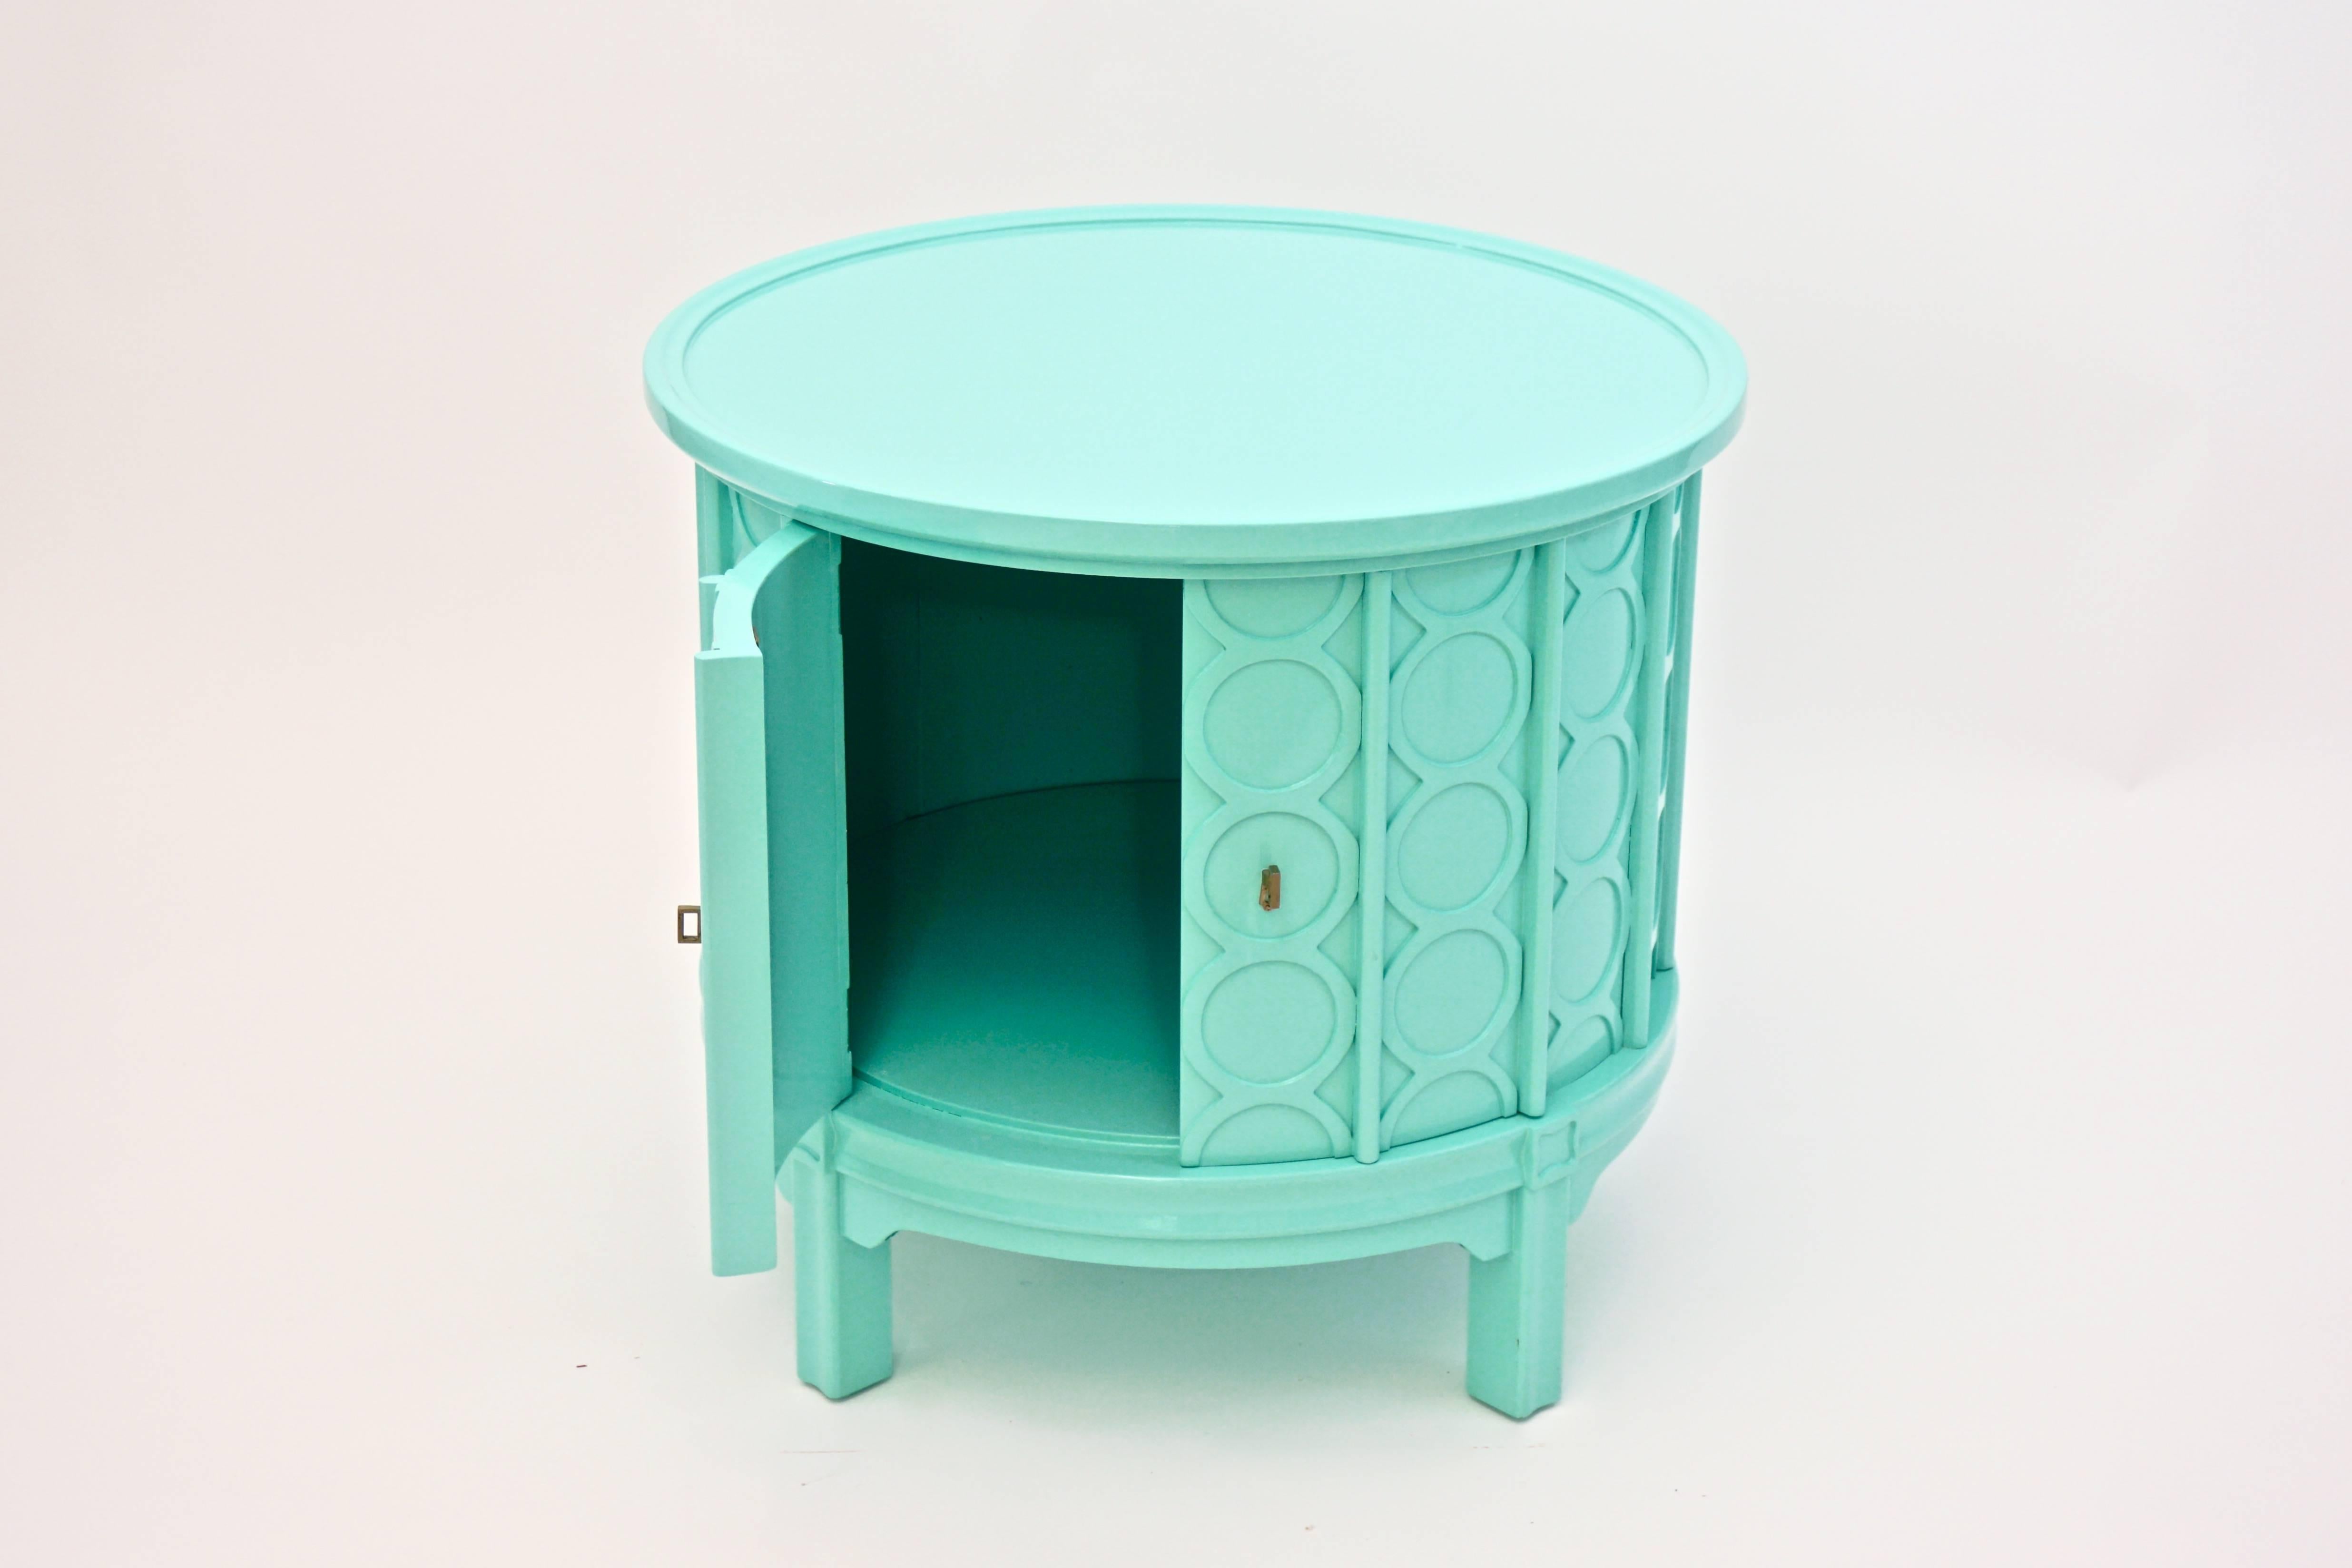 Mid-Century round Drum Side Table with carved circular detailing. Newly-lacquered in high-gloss turquoise finish.   Doors open to reveal interior storage.

